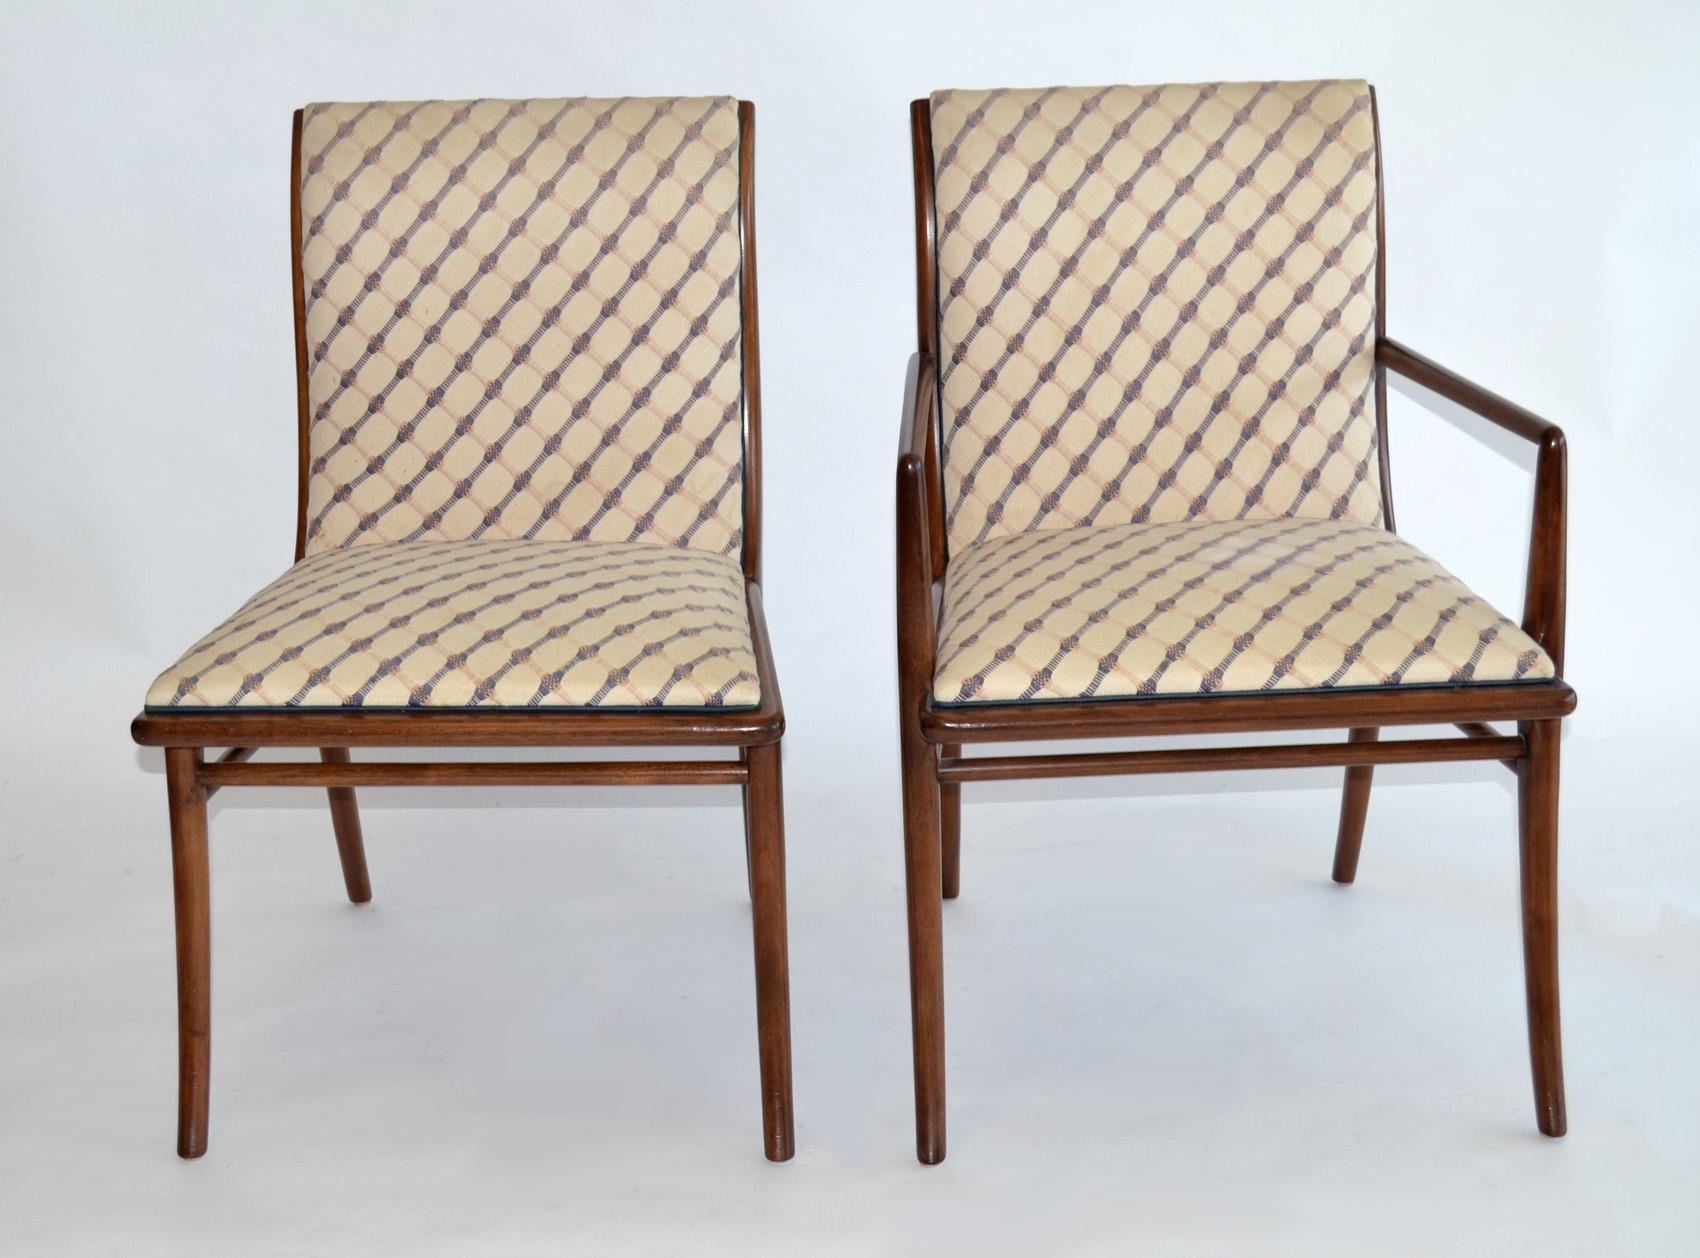 Set of Six Saber Leg Dining Chairs by T.H. Robsjohn-Gibbings for Widdicomb. Rarely-seen fin-backed design with undulating animal-like legs. A gorgeous mid century modern design. Two armchairs and four sides feature original upholstery. Signed. Table